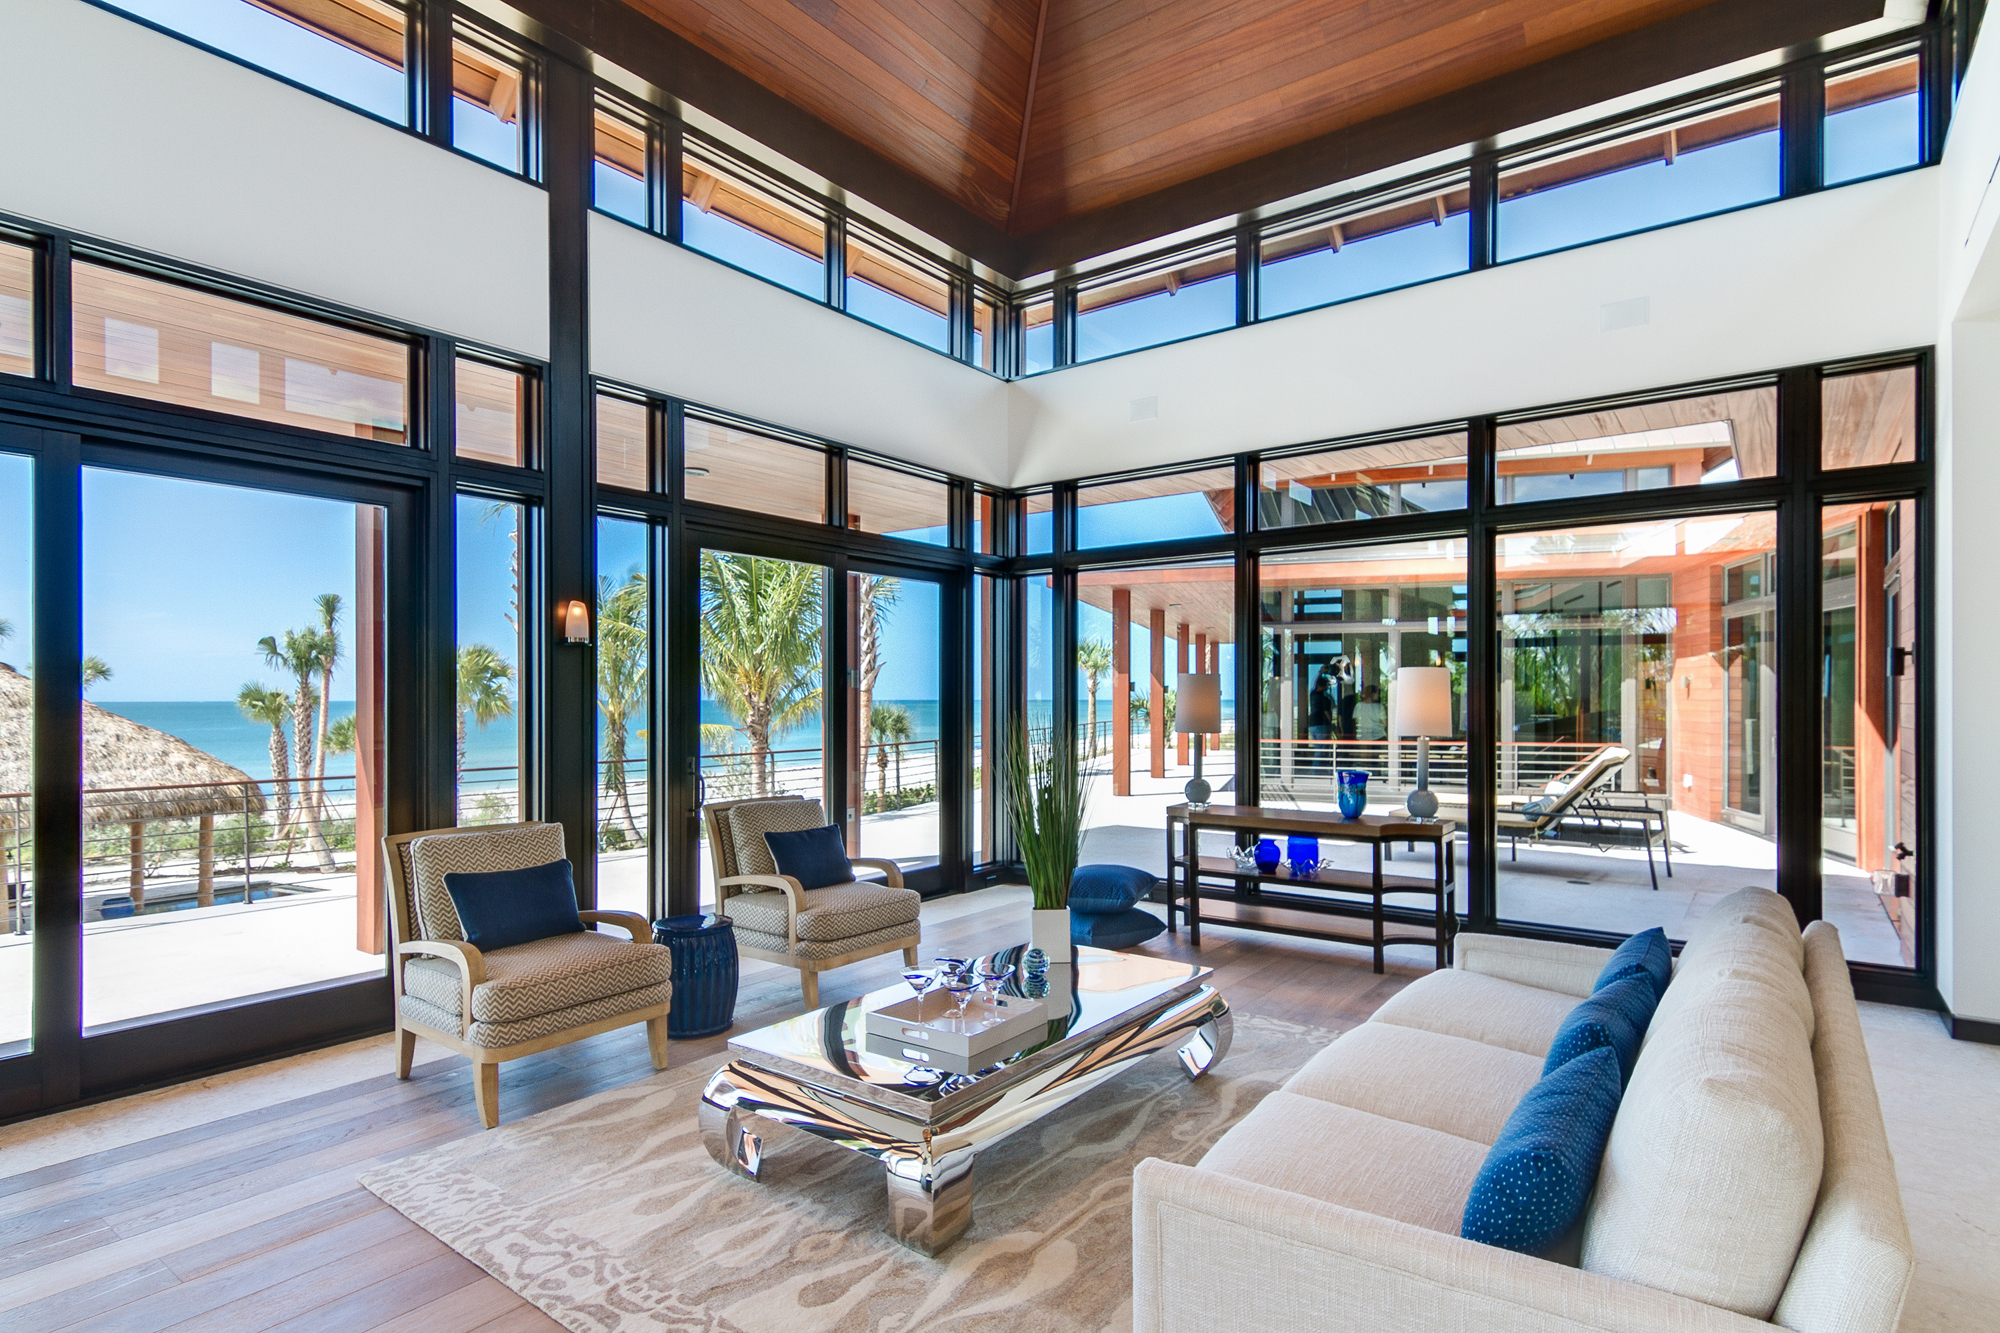 The 2.57-acre Gulf-front Ohana Estate is listed for $22 million.